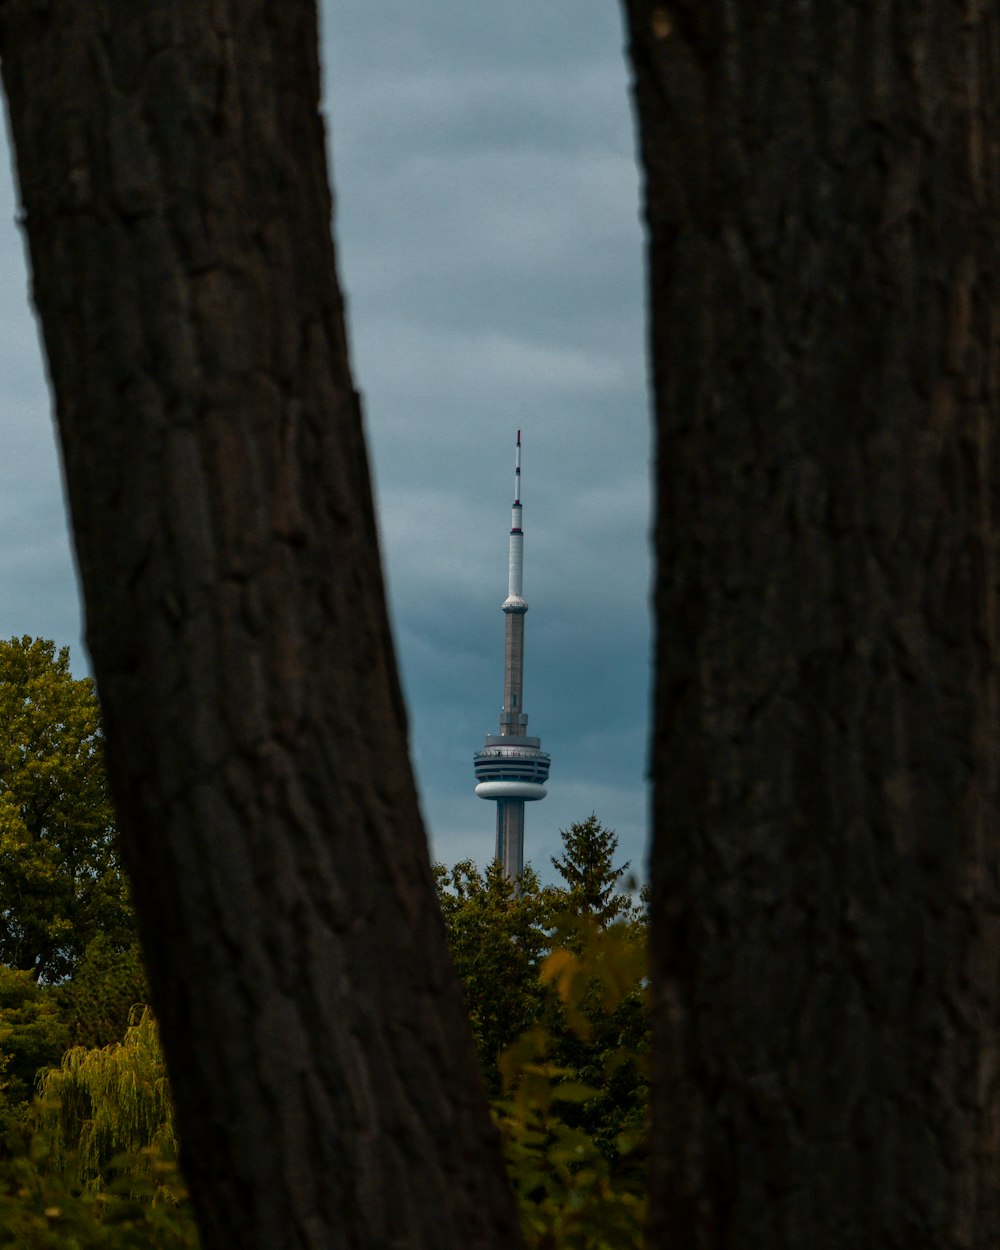 a view of a tall tower through some trees